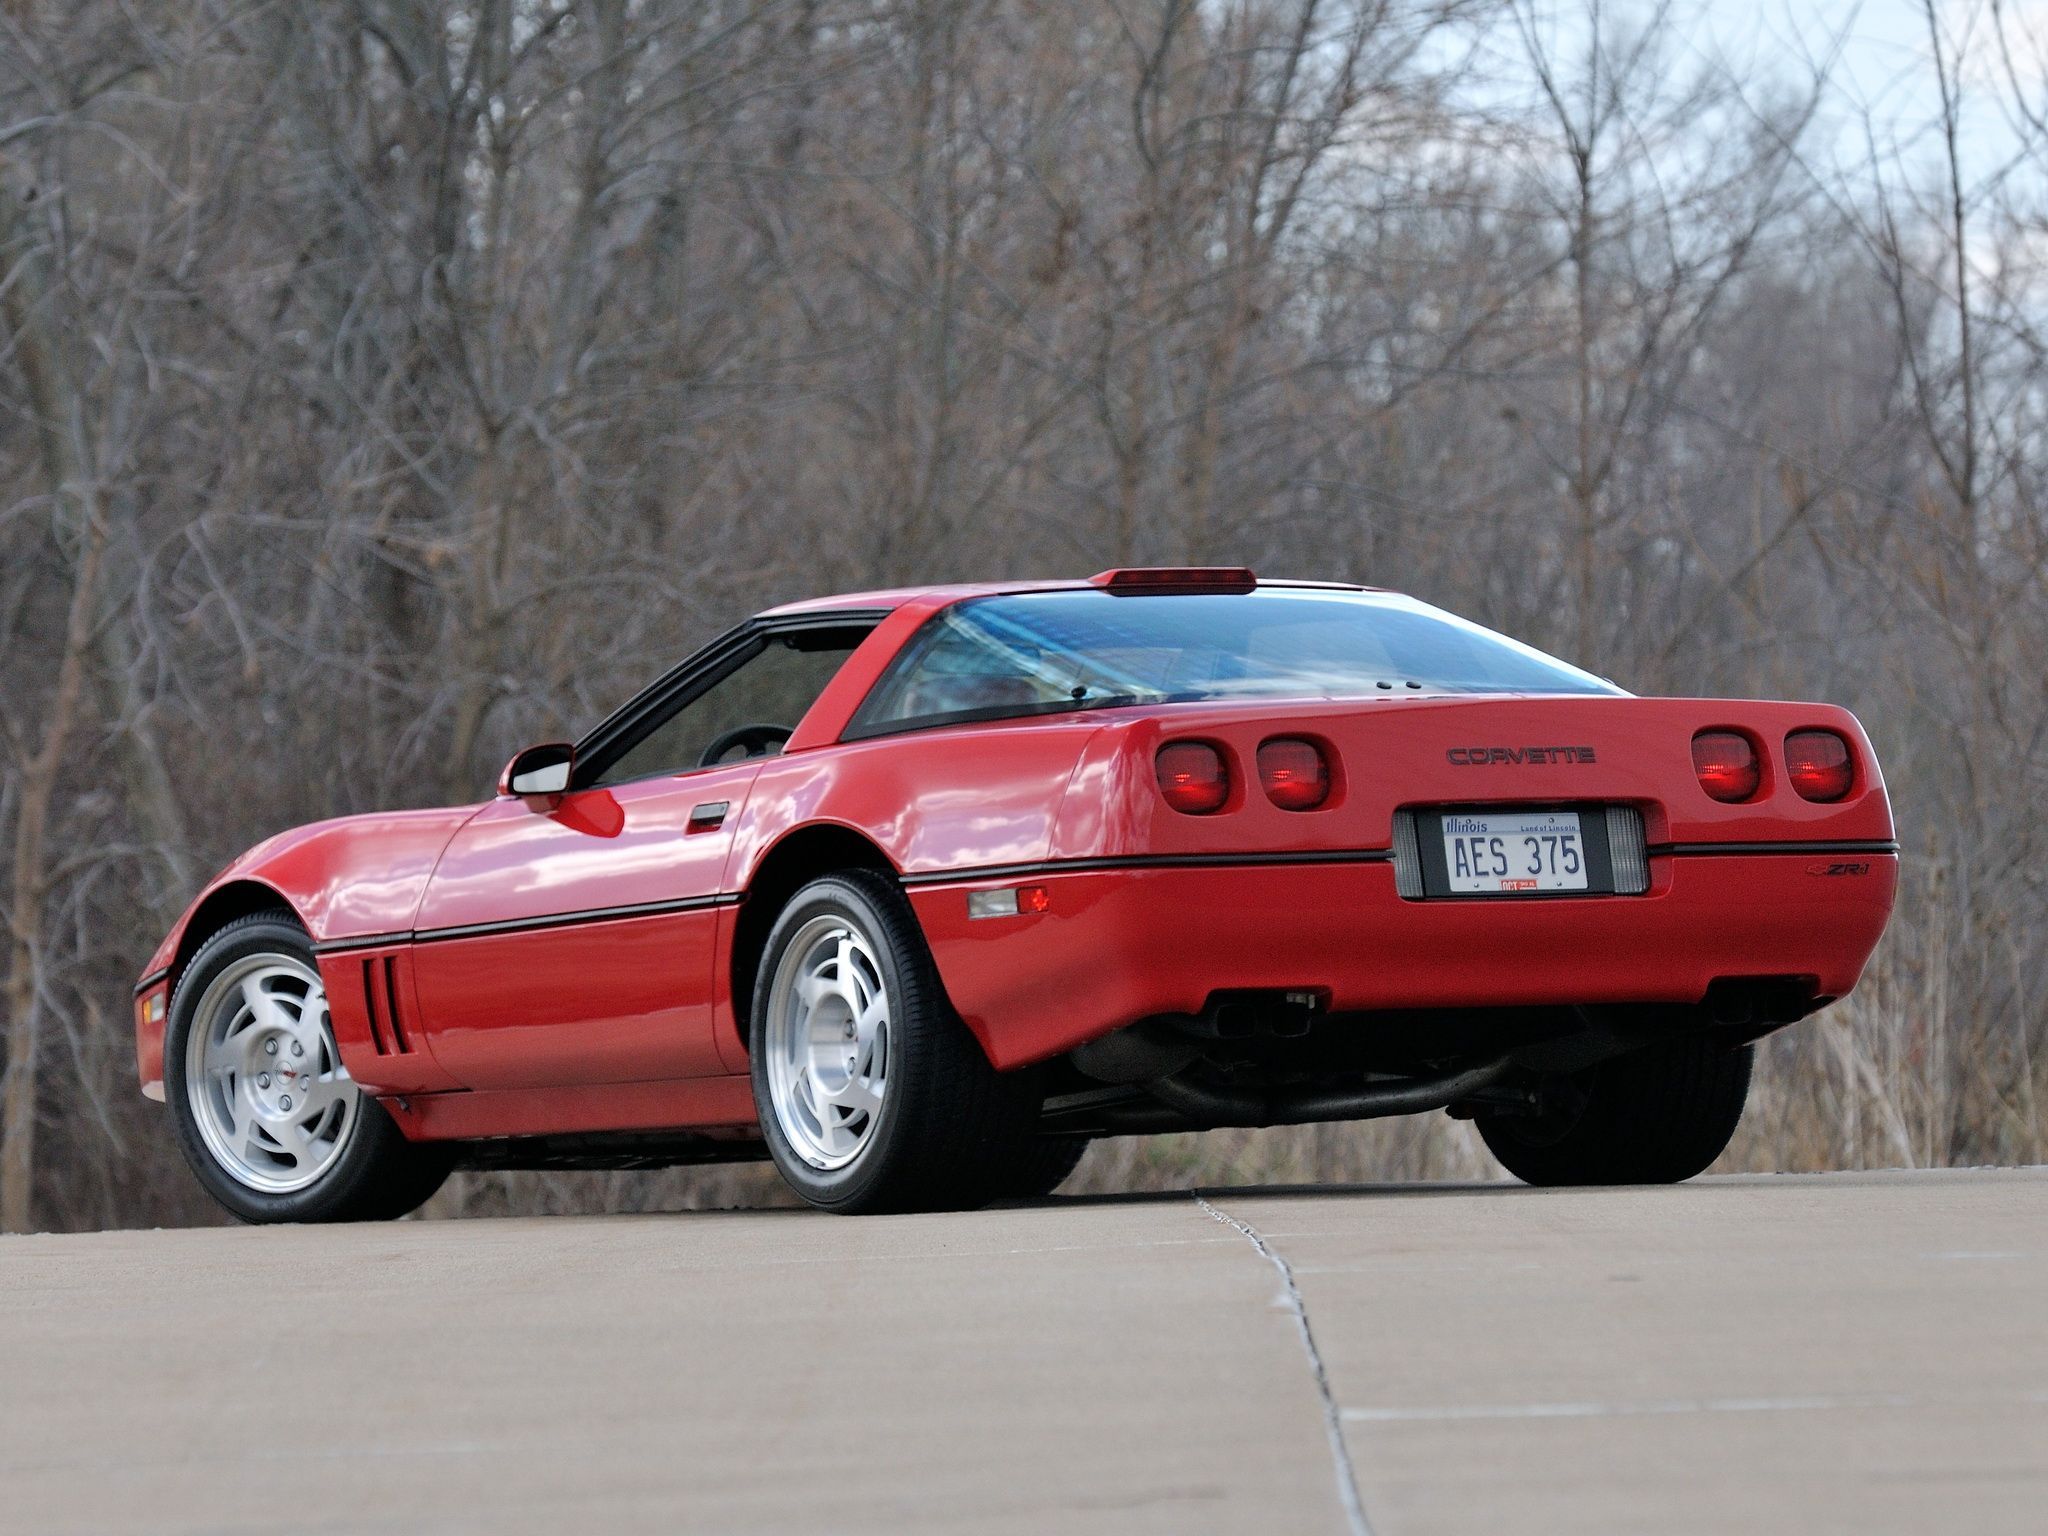 Rear view of a red C4 Corvette